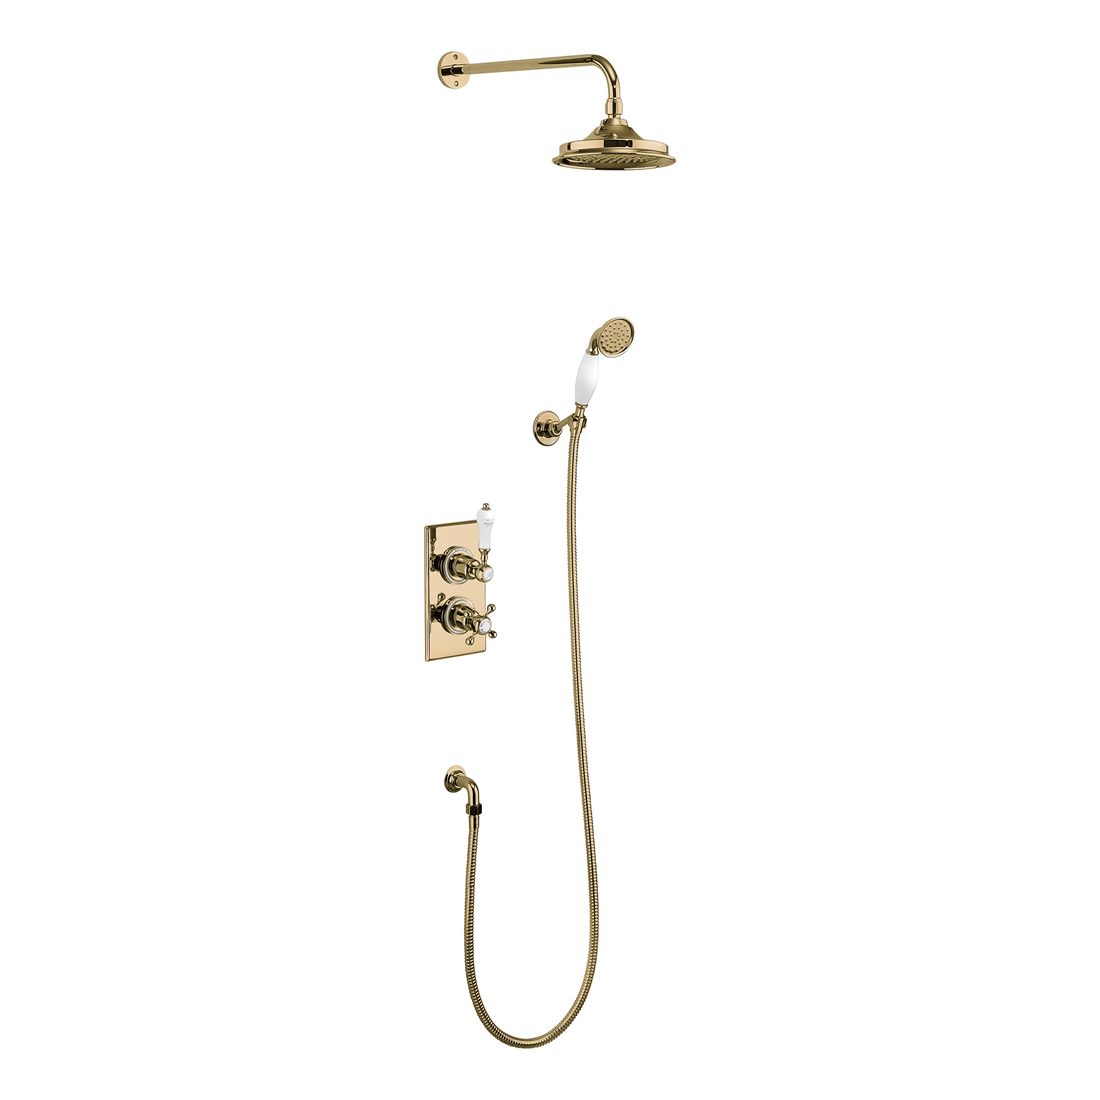 Trent Thermostatic Two Outlet Concealed Divertor  Shower Valve , Fixed Shower Arm, Handset & Holder with Hose with 9 inch rose  - GOLD